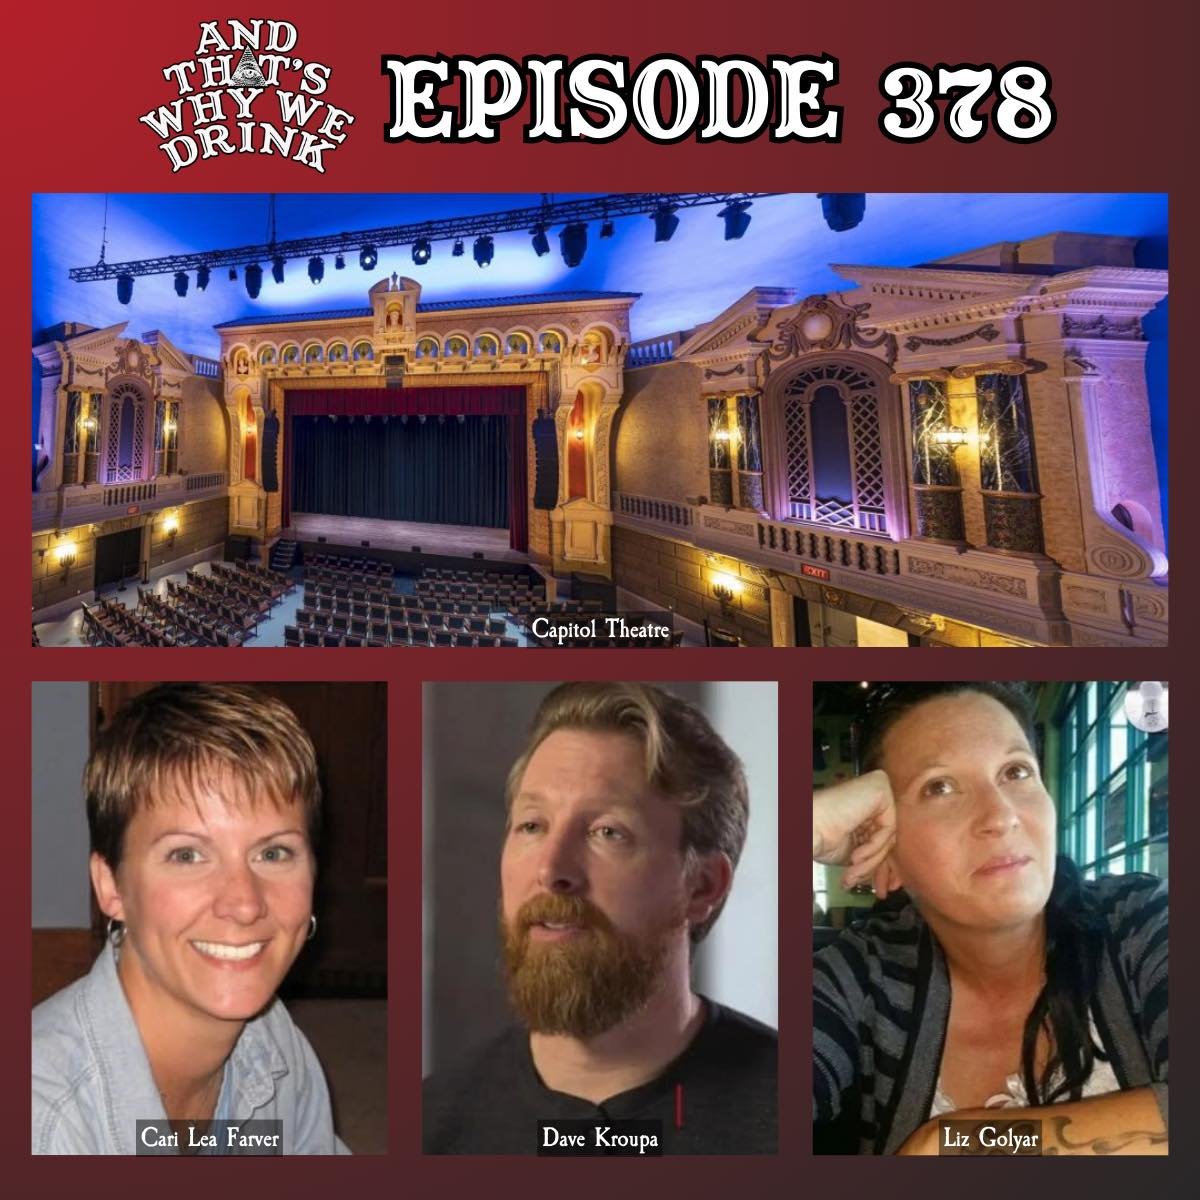 Episode 378 is here and the theme is&hellip; butter? Today Em takes us to Michigan for the haunted (and stunning) Capitol Theatre, then Christine brings us the absolutely wild case of Cari Lea Farver&hellip; and that&rsquo;s why we drink!

➡️ Swipe f